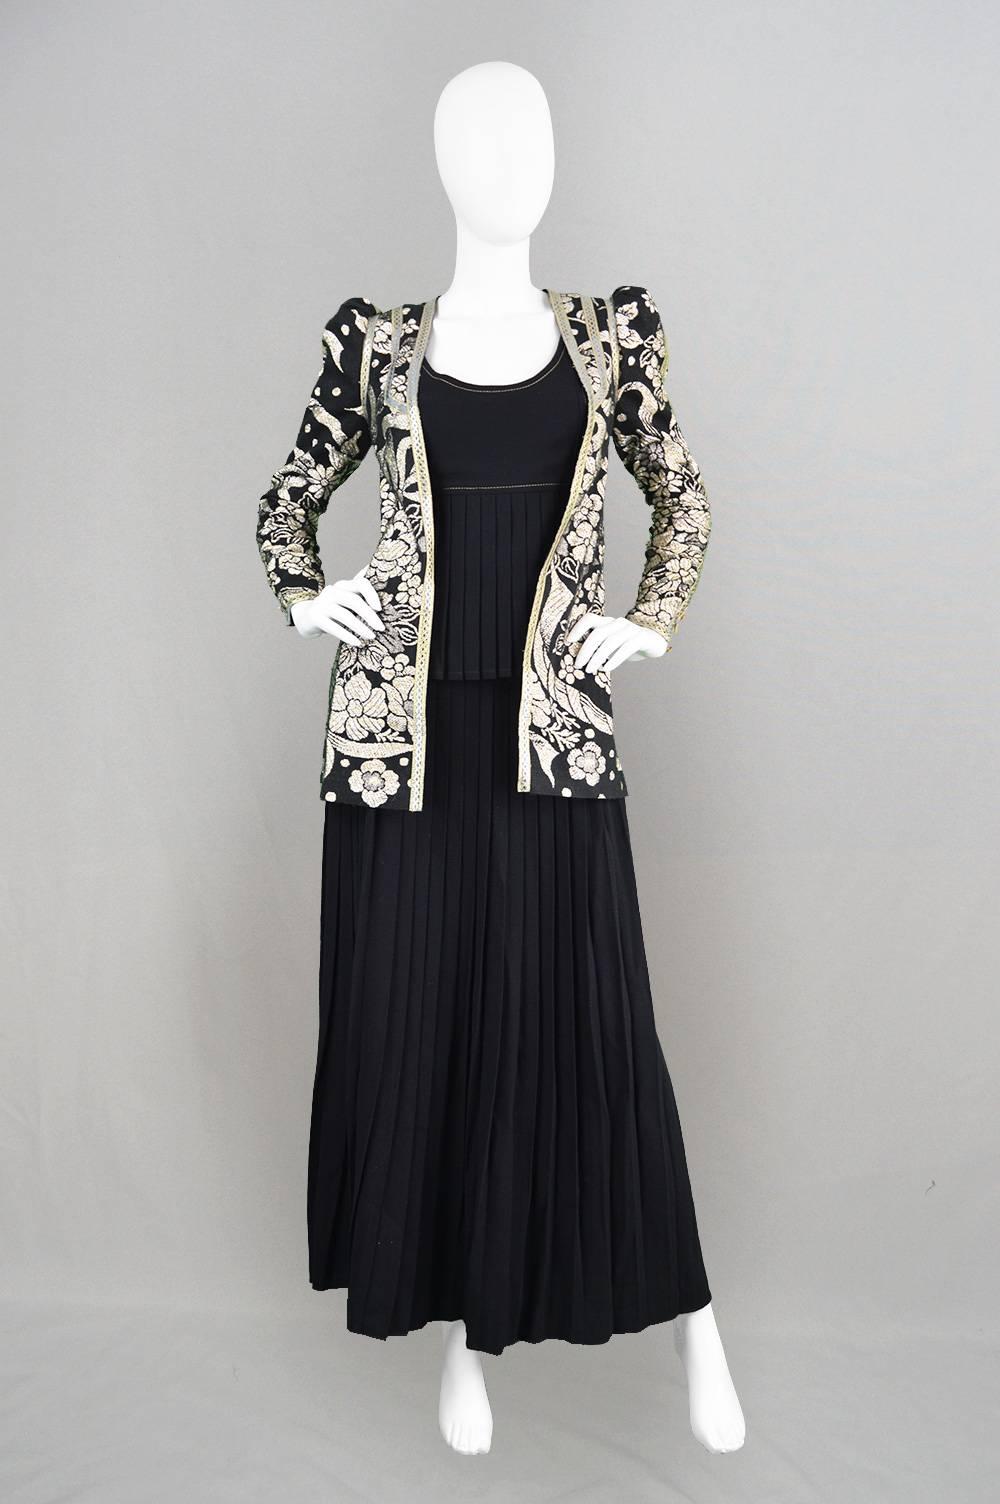 An incredibly elegant vintage three piece set from the 1970's by highly collectible and extraordinary British designer, Bill Gibb. In a luxurious wool crepe which gives the most amazing drape - both the long maxi skirt and top are pleated, which